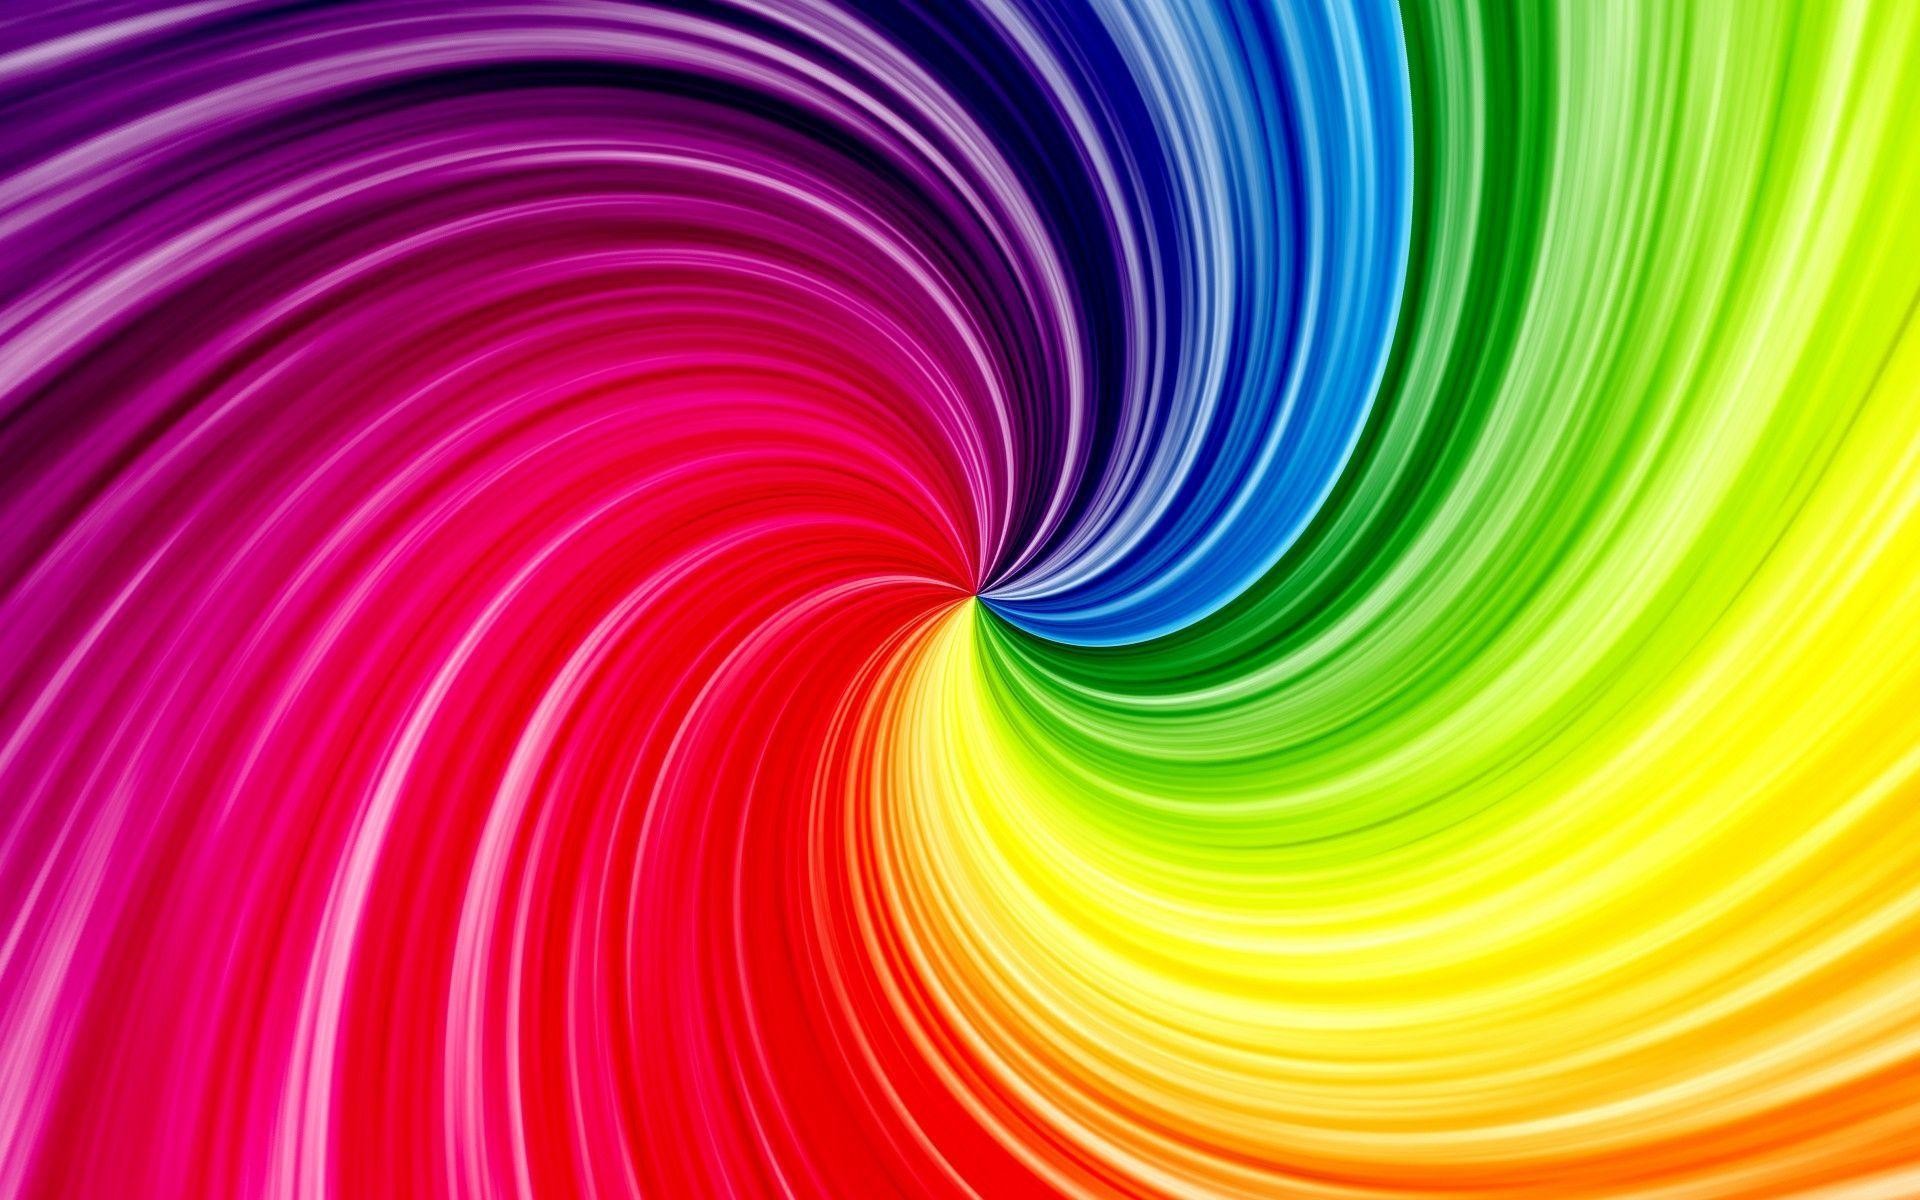 Bright Colorful Waves 308156 Images HD Wallpapers Wallfoy